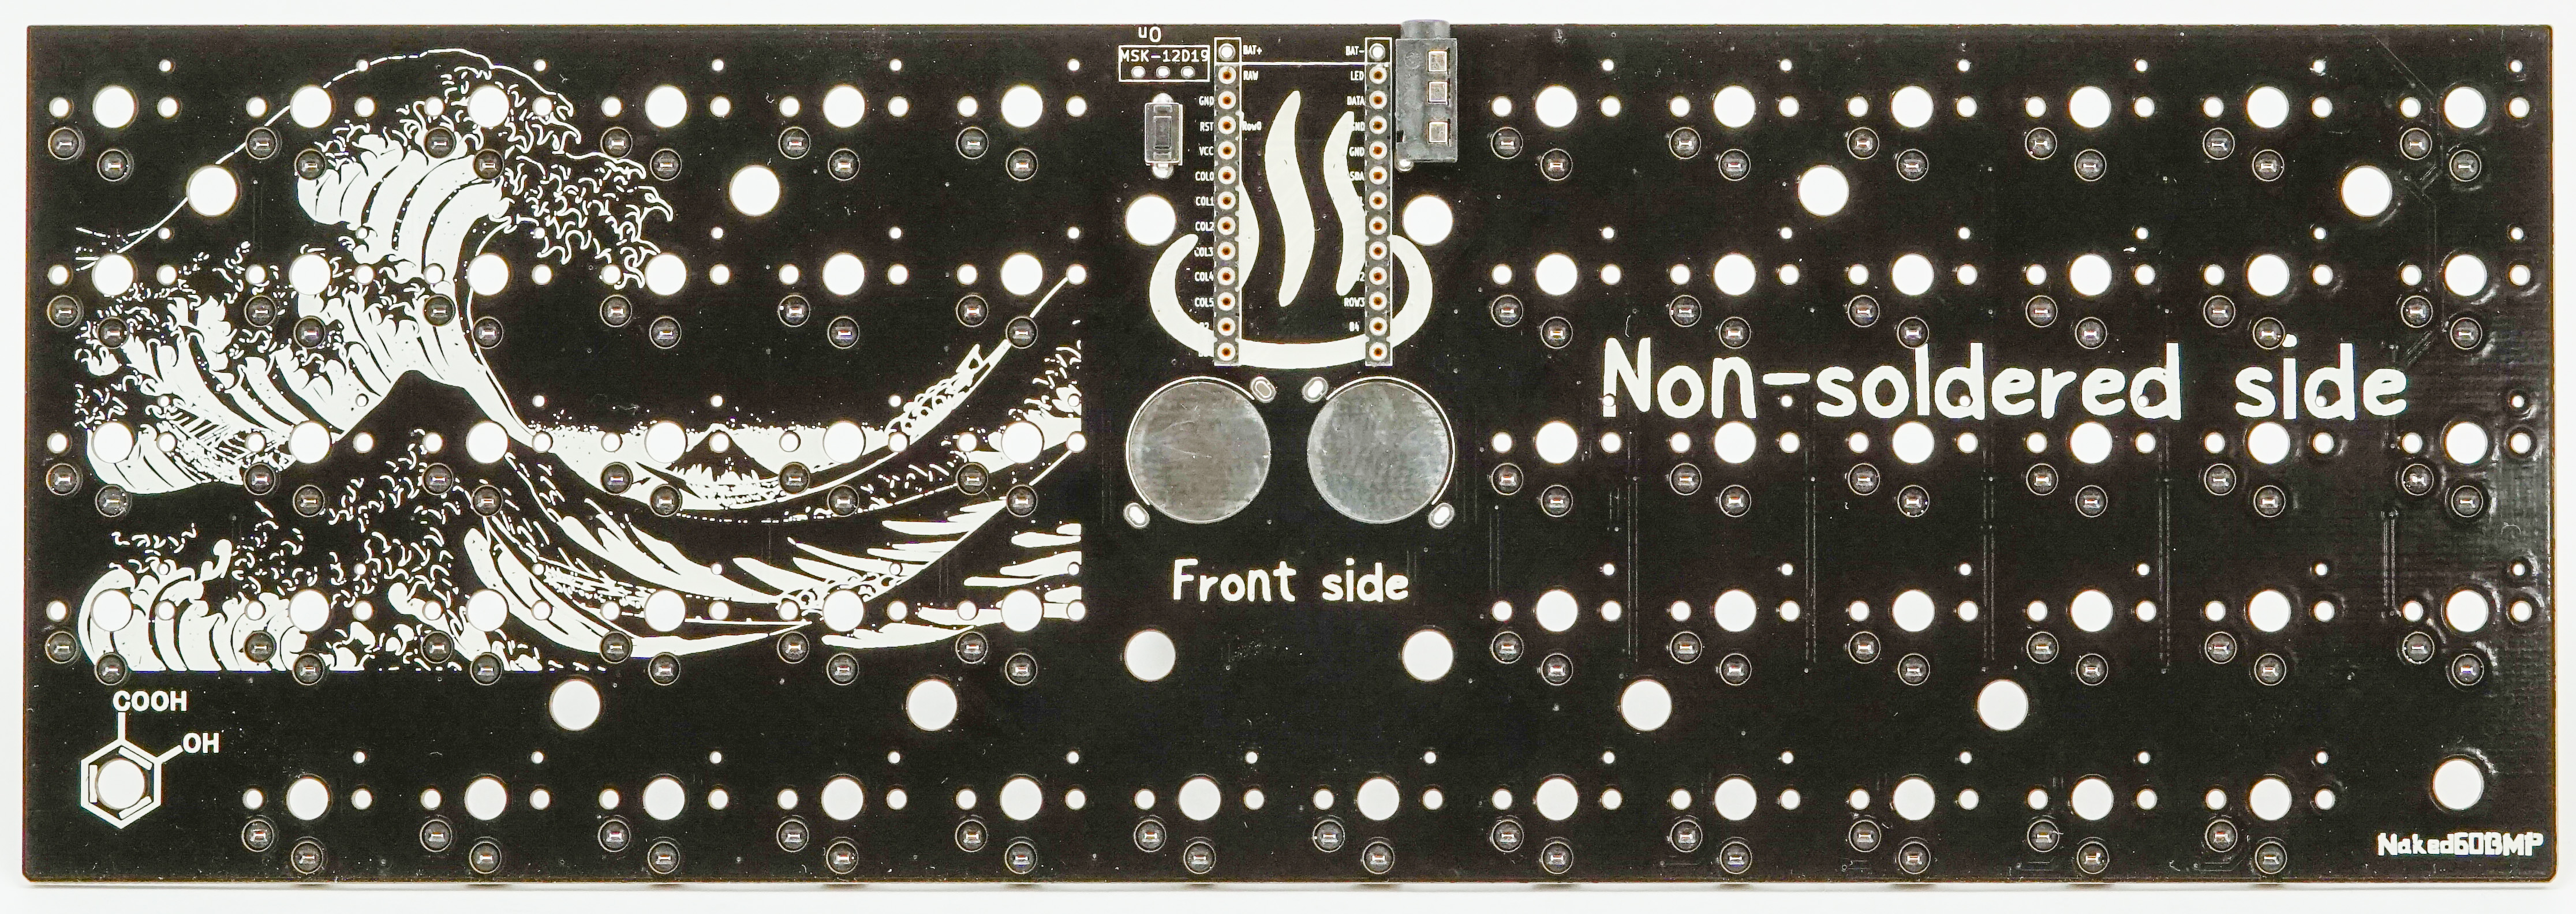 Naked60BMP PCB Front